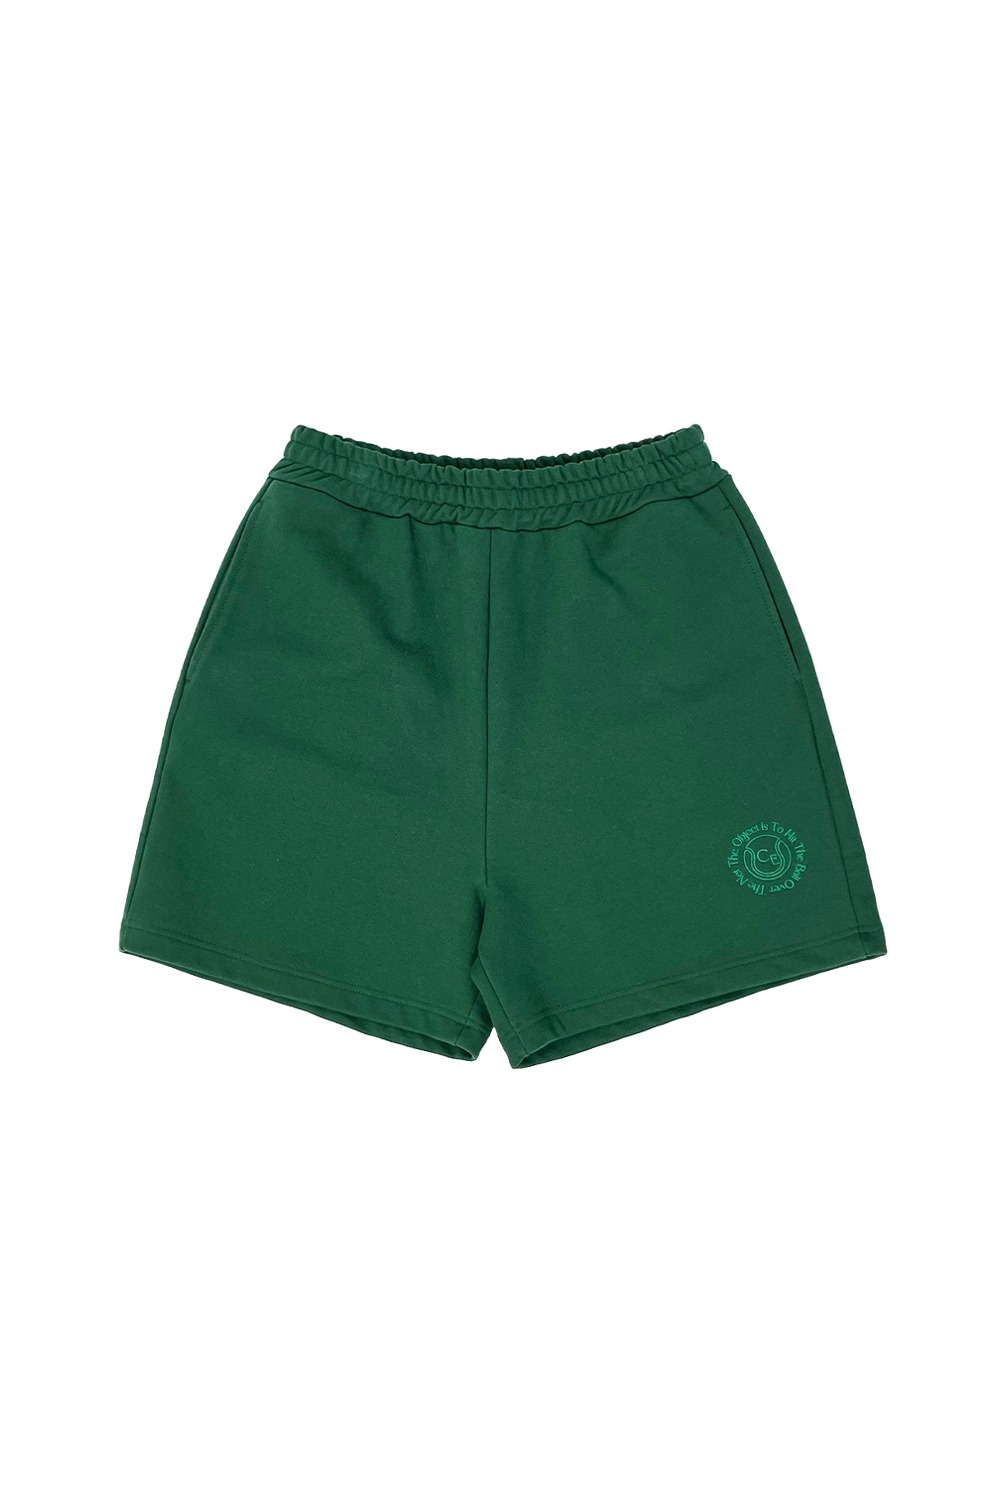 sweat shorts clever logo Embroidered(GREEN) RICHEZ